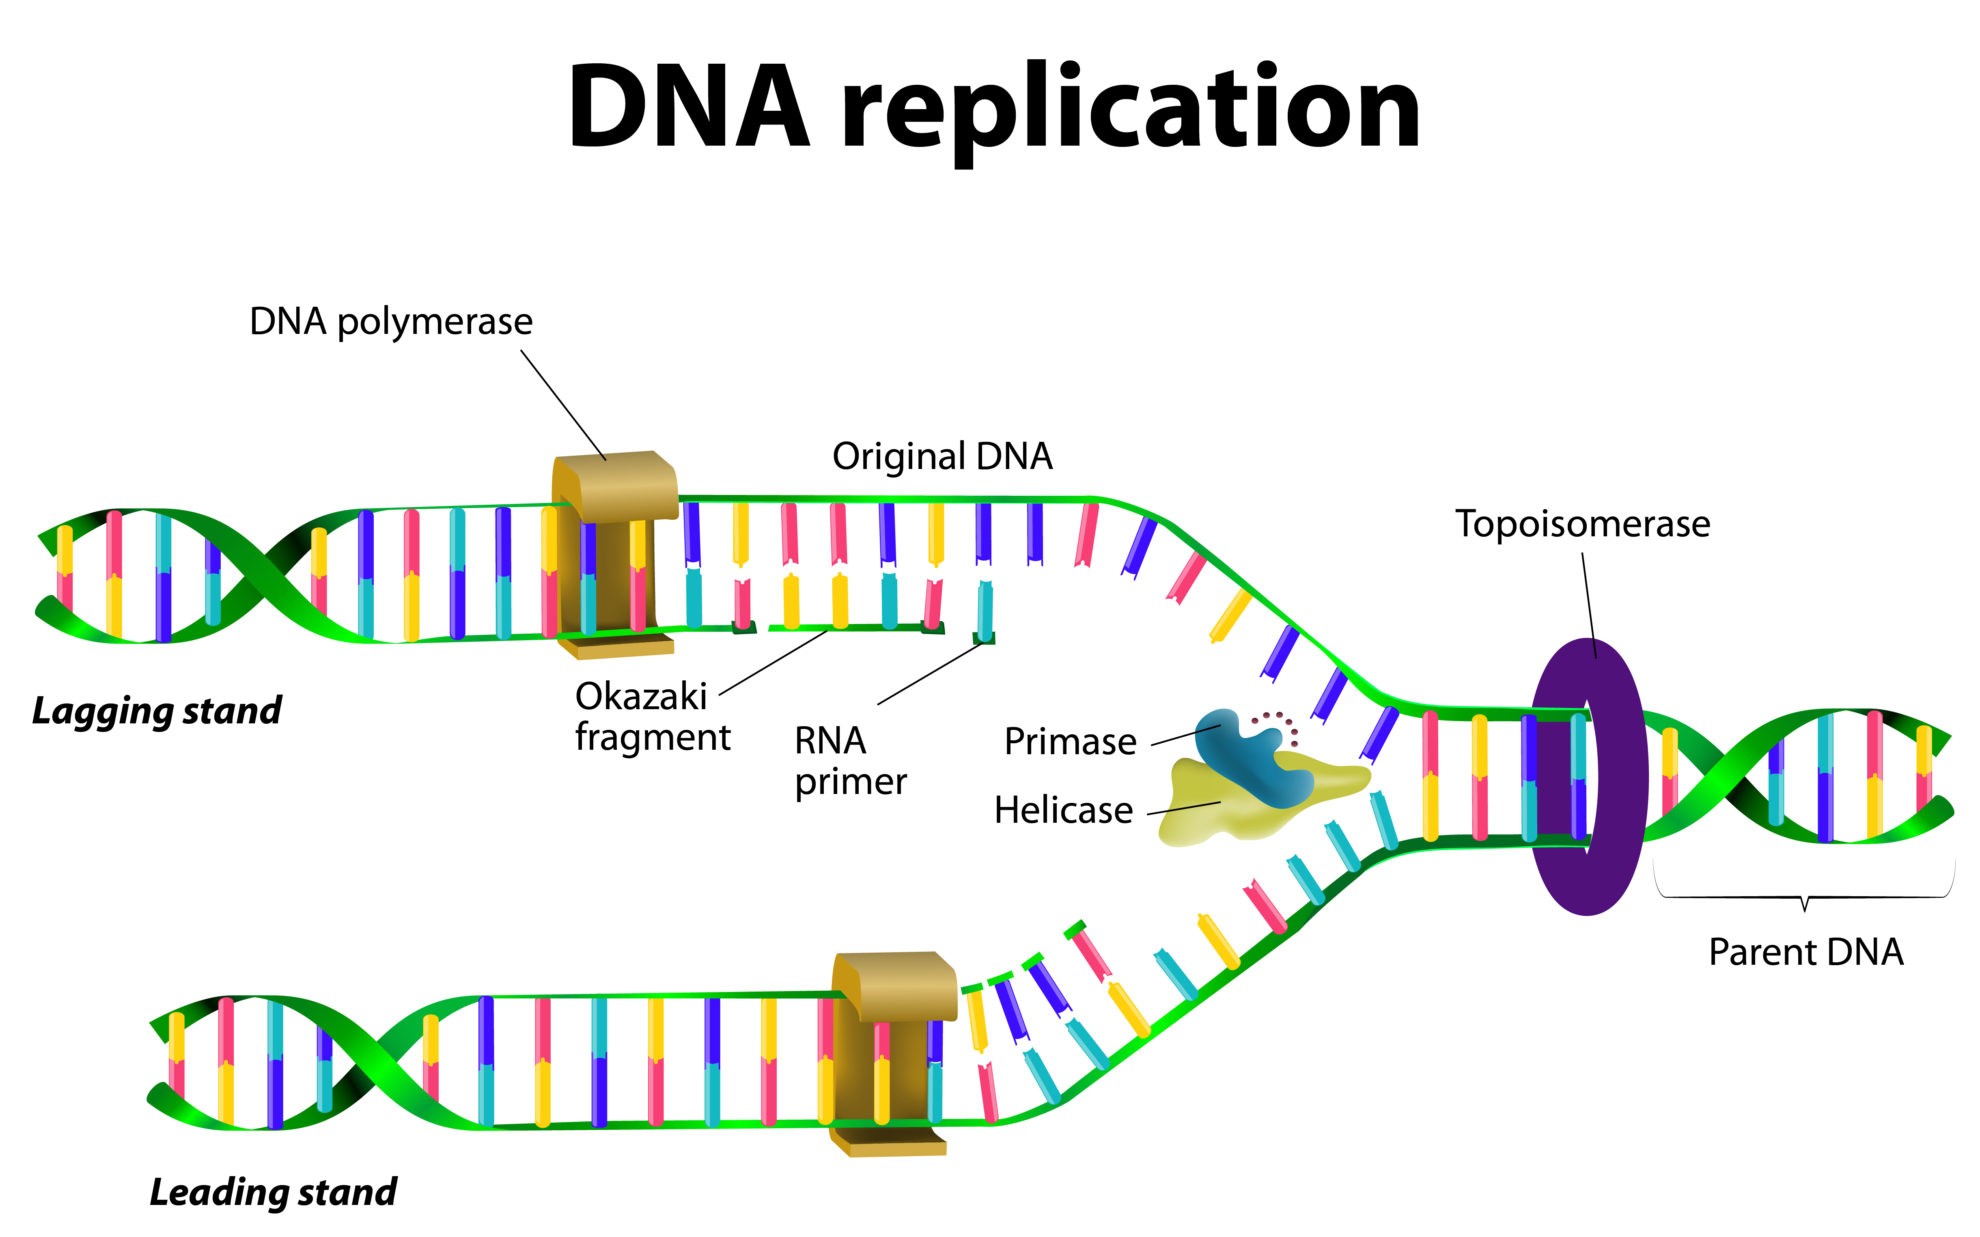 dna replication animation wiley answers